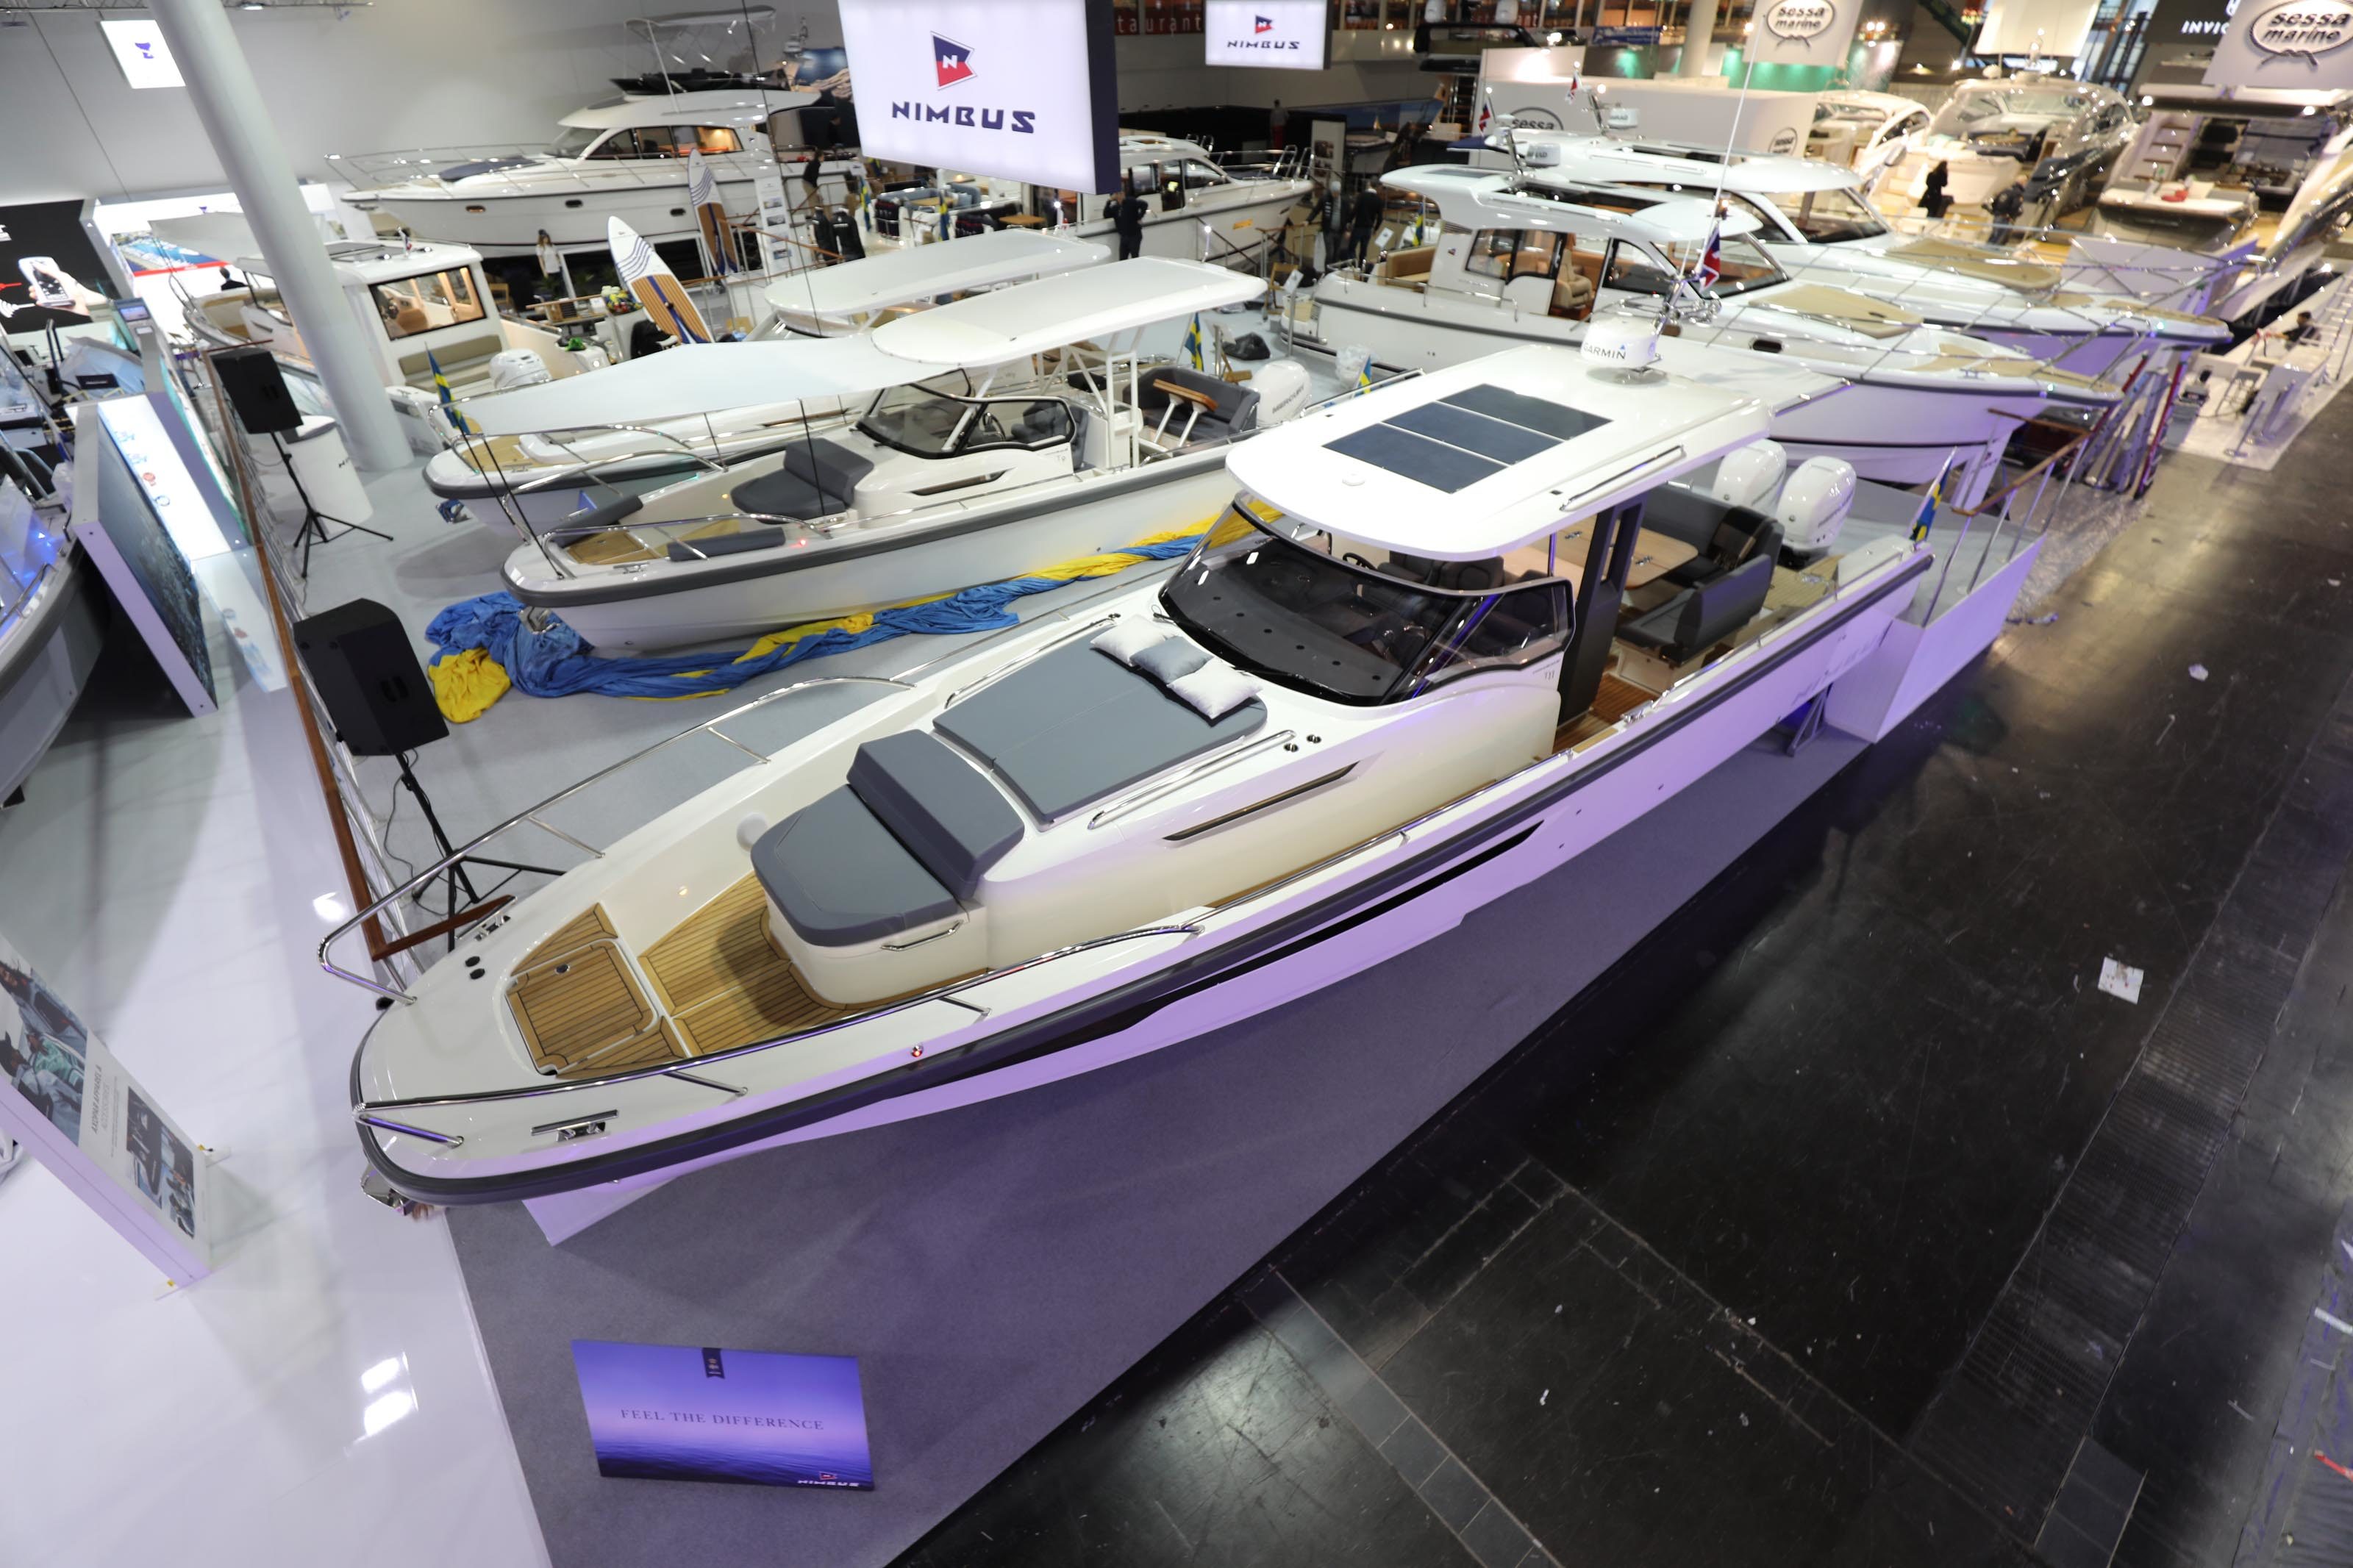 Nimbus boat in showroom from above